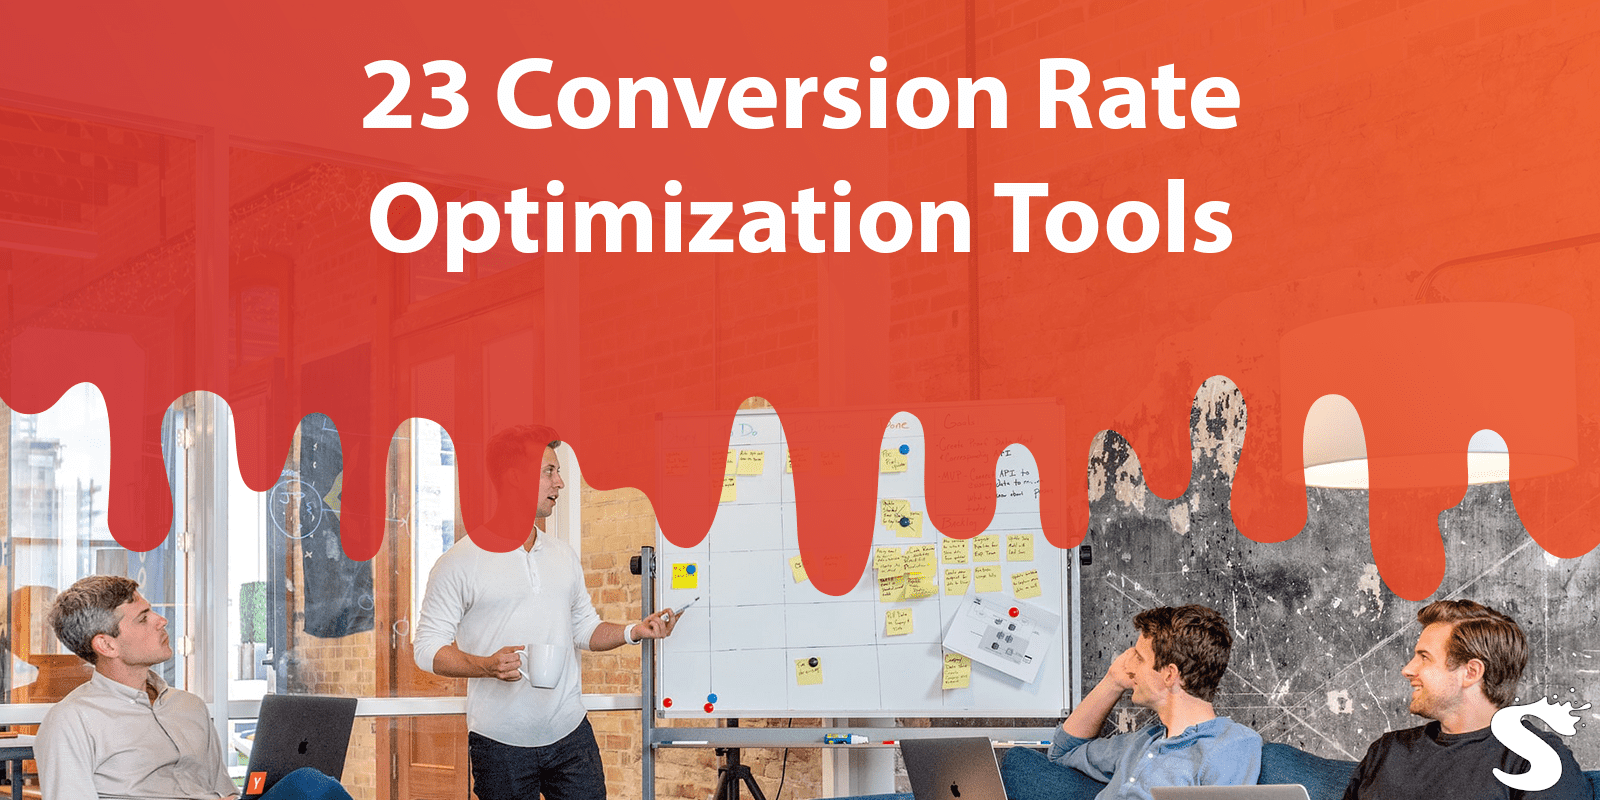 23 Conversion Rate Optimization Tools for Research, Feedback, Analytics & More